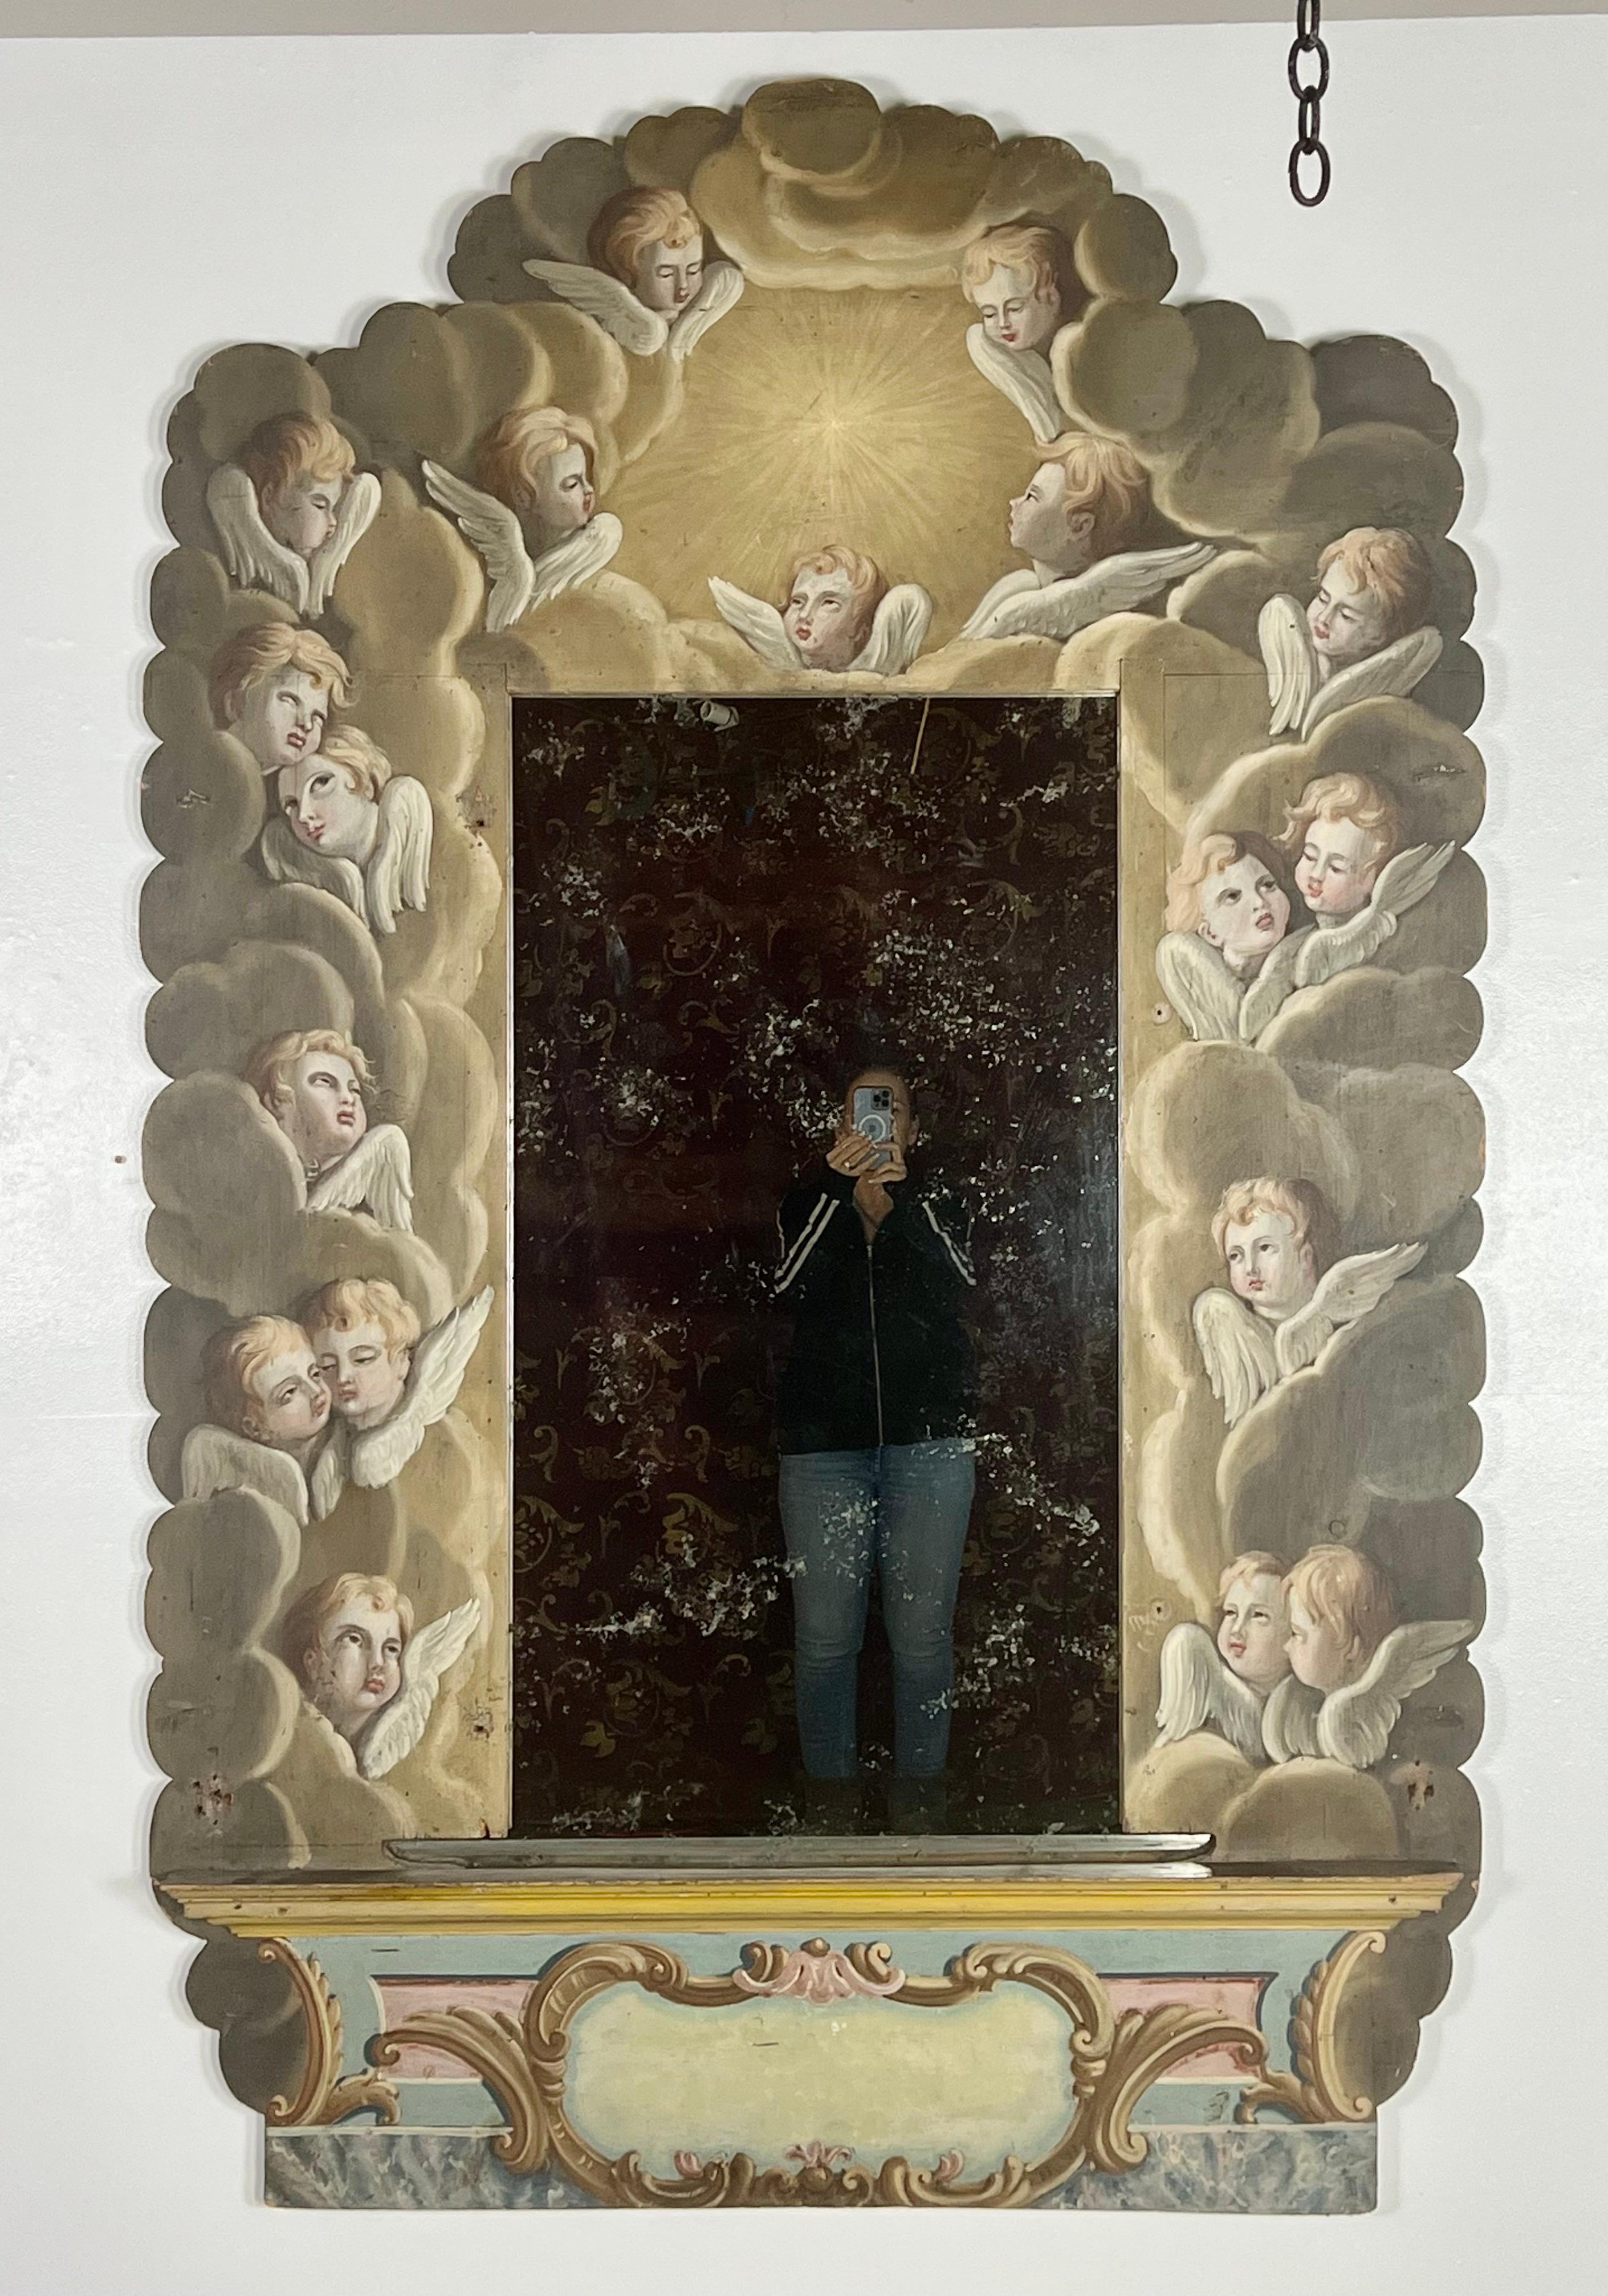 Monumental one-of-a-kind Italian hand painted frame adorned with finely hand-painted winged angel faces though-out. The faces seem to be floating in the heavens having a lovely time. The bottom depicted an empty cartouche surrounded by acanthus